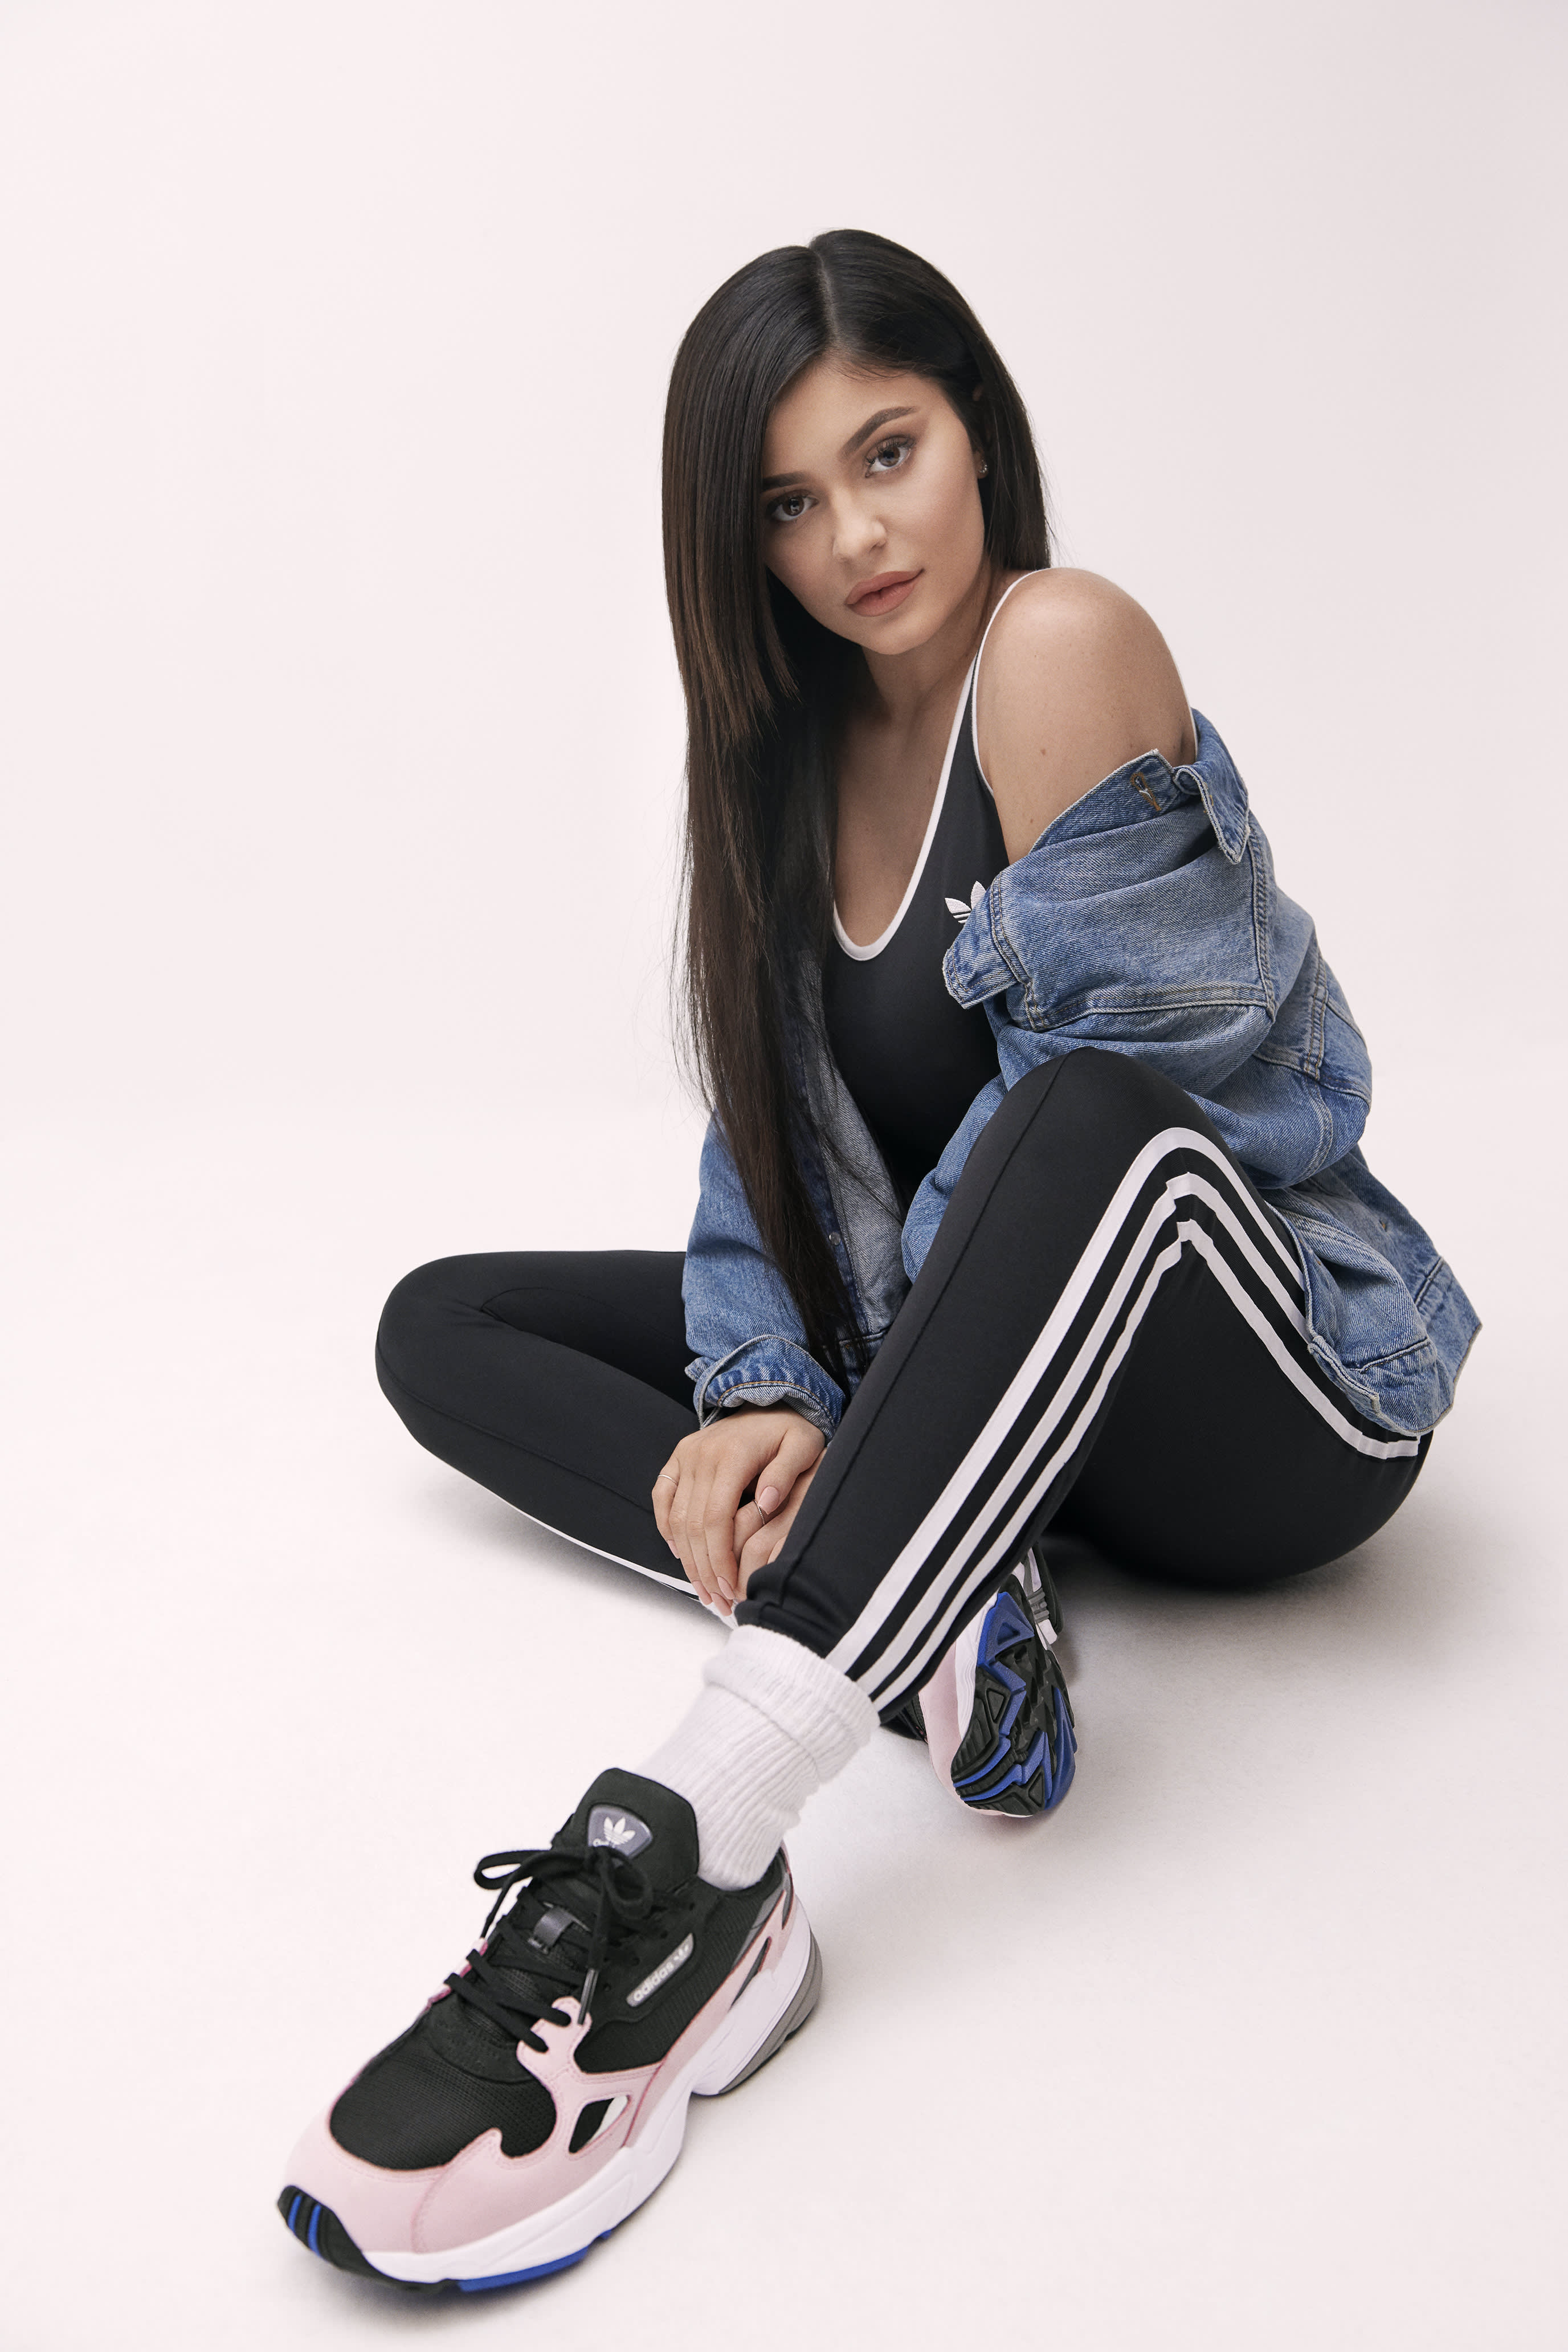 Sloppy Onset Executable adidas Falcon with Kylie Jenner